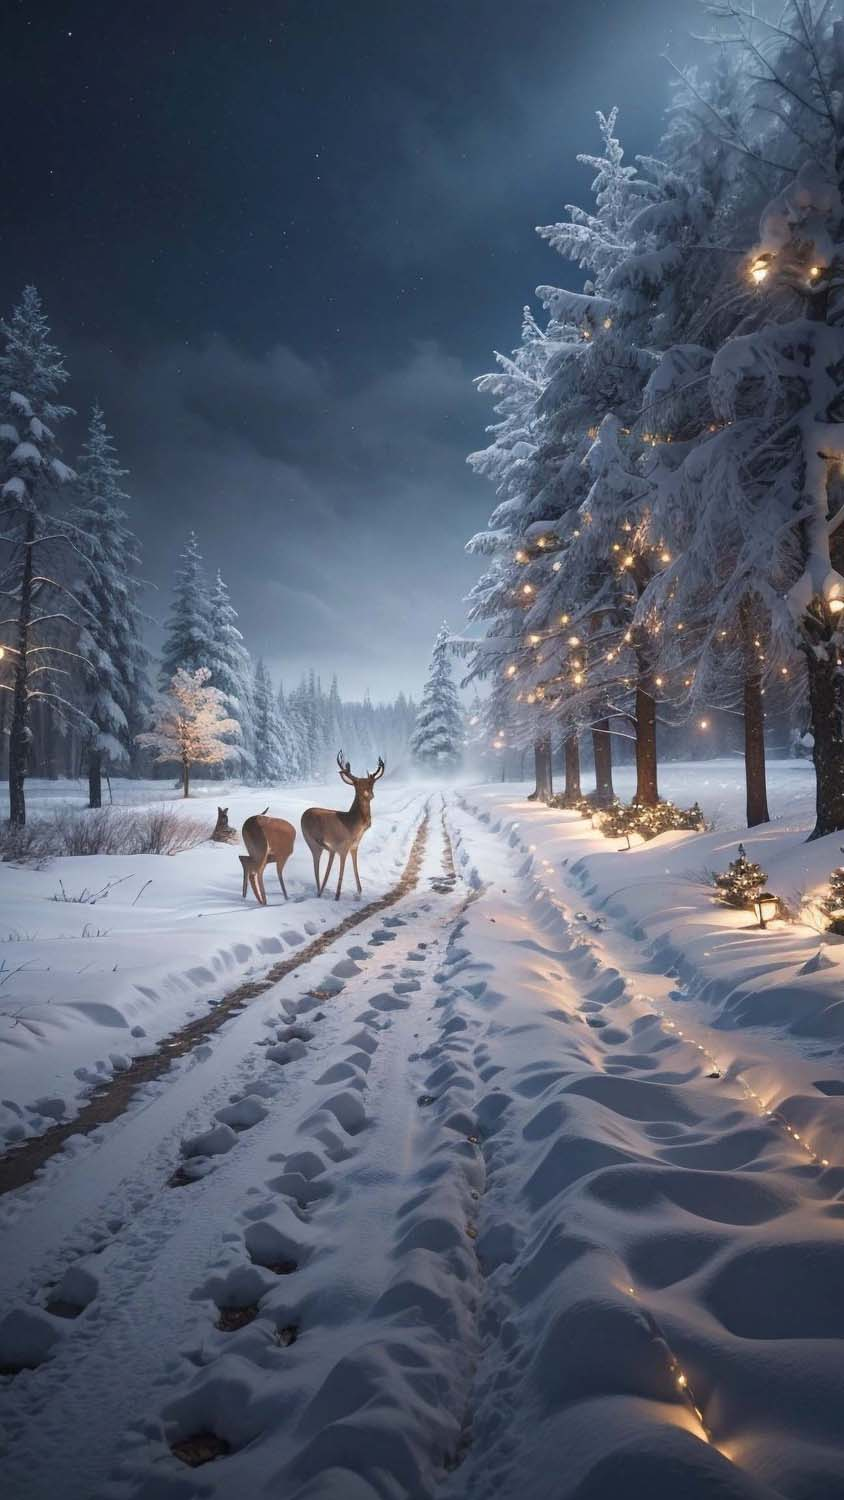 Christmas Forest iPhone Wallpaper 4K  iPhone Wallpapers